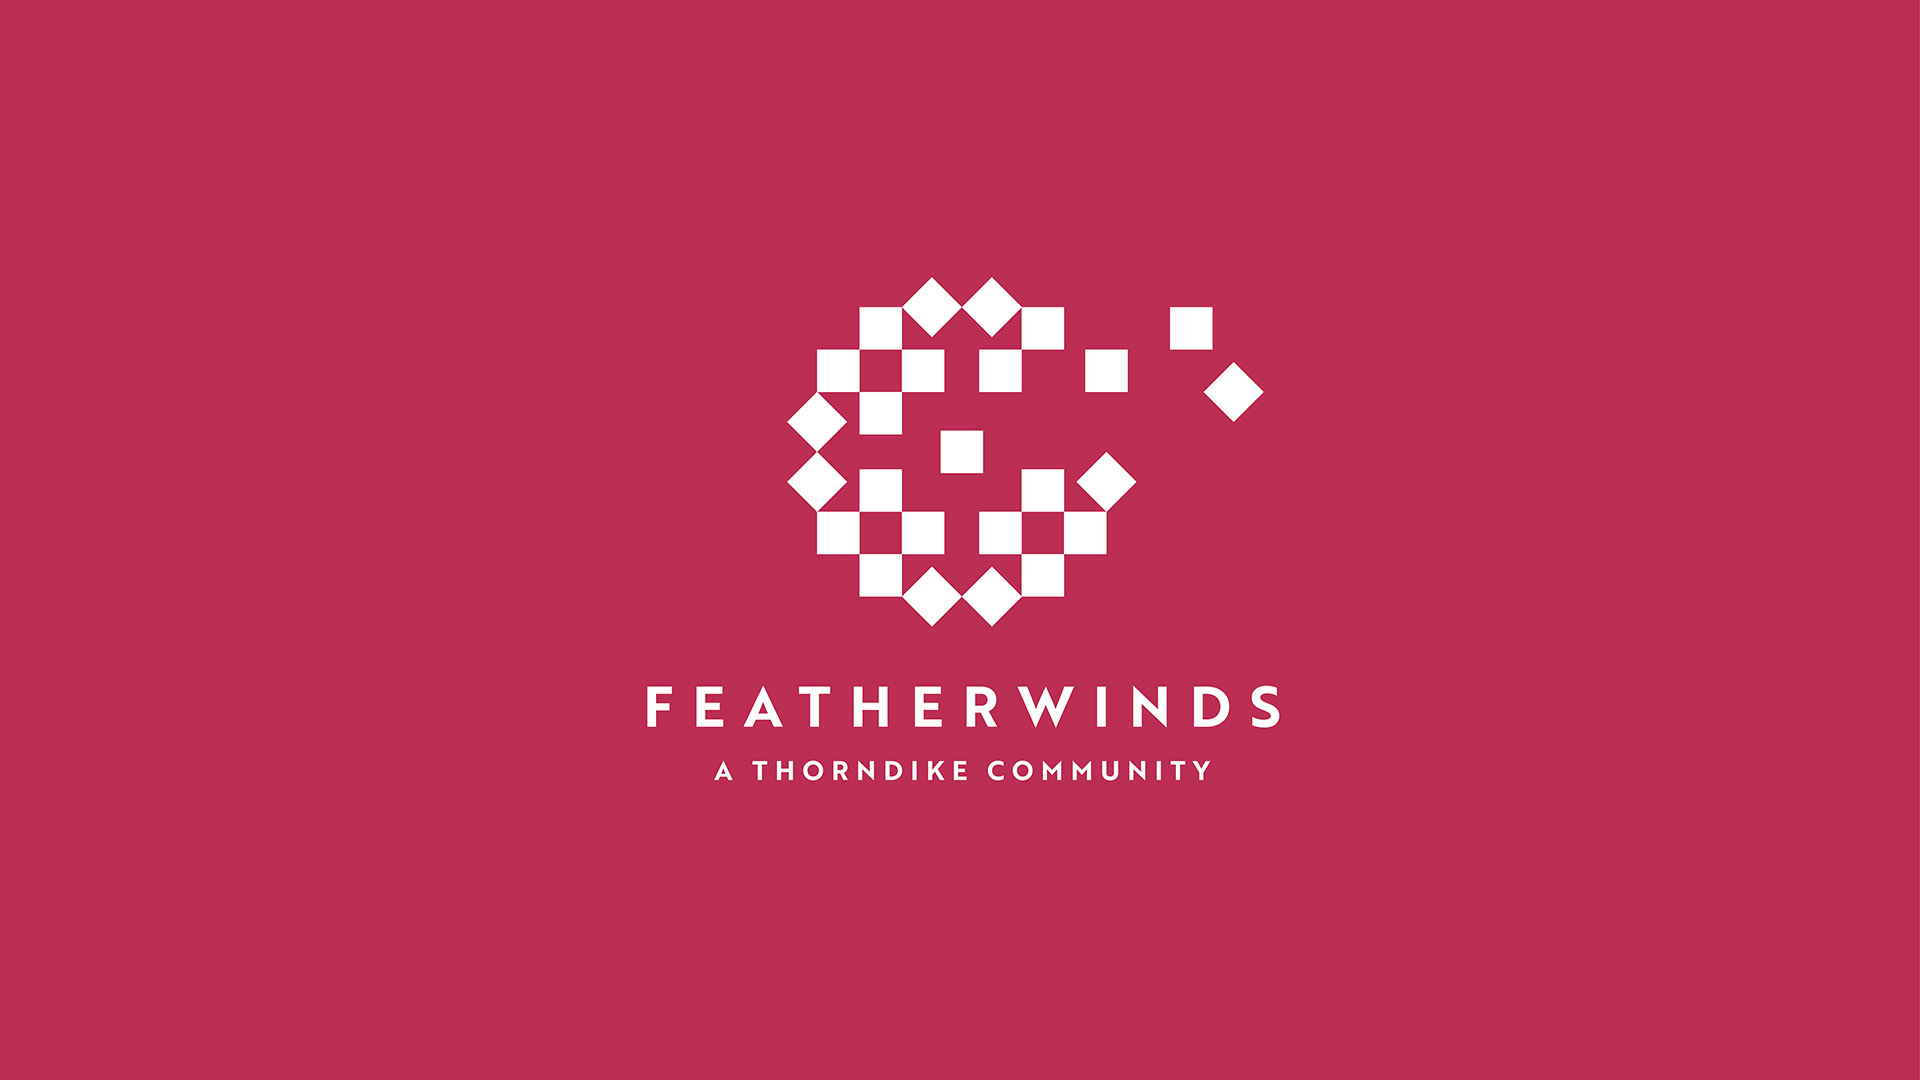 featherwinds white logo on red